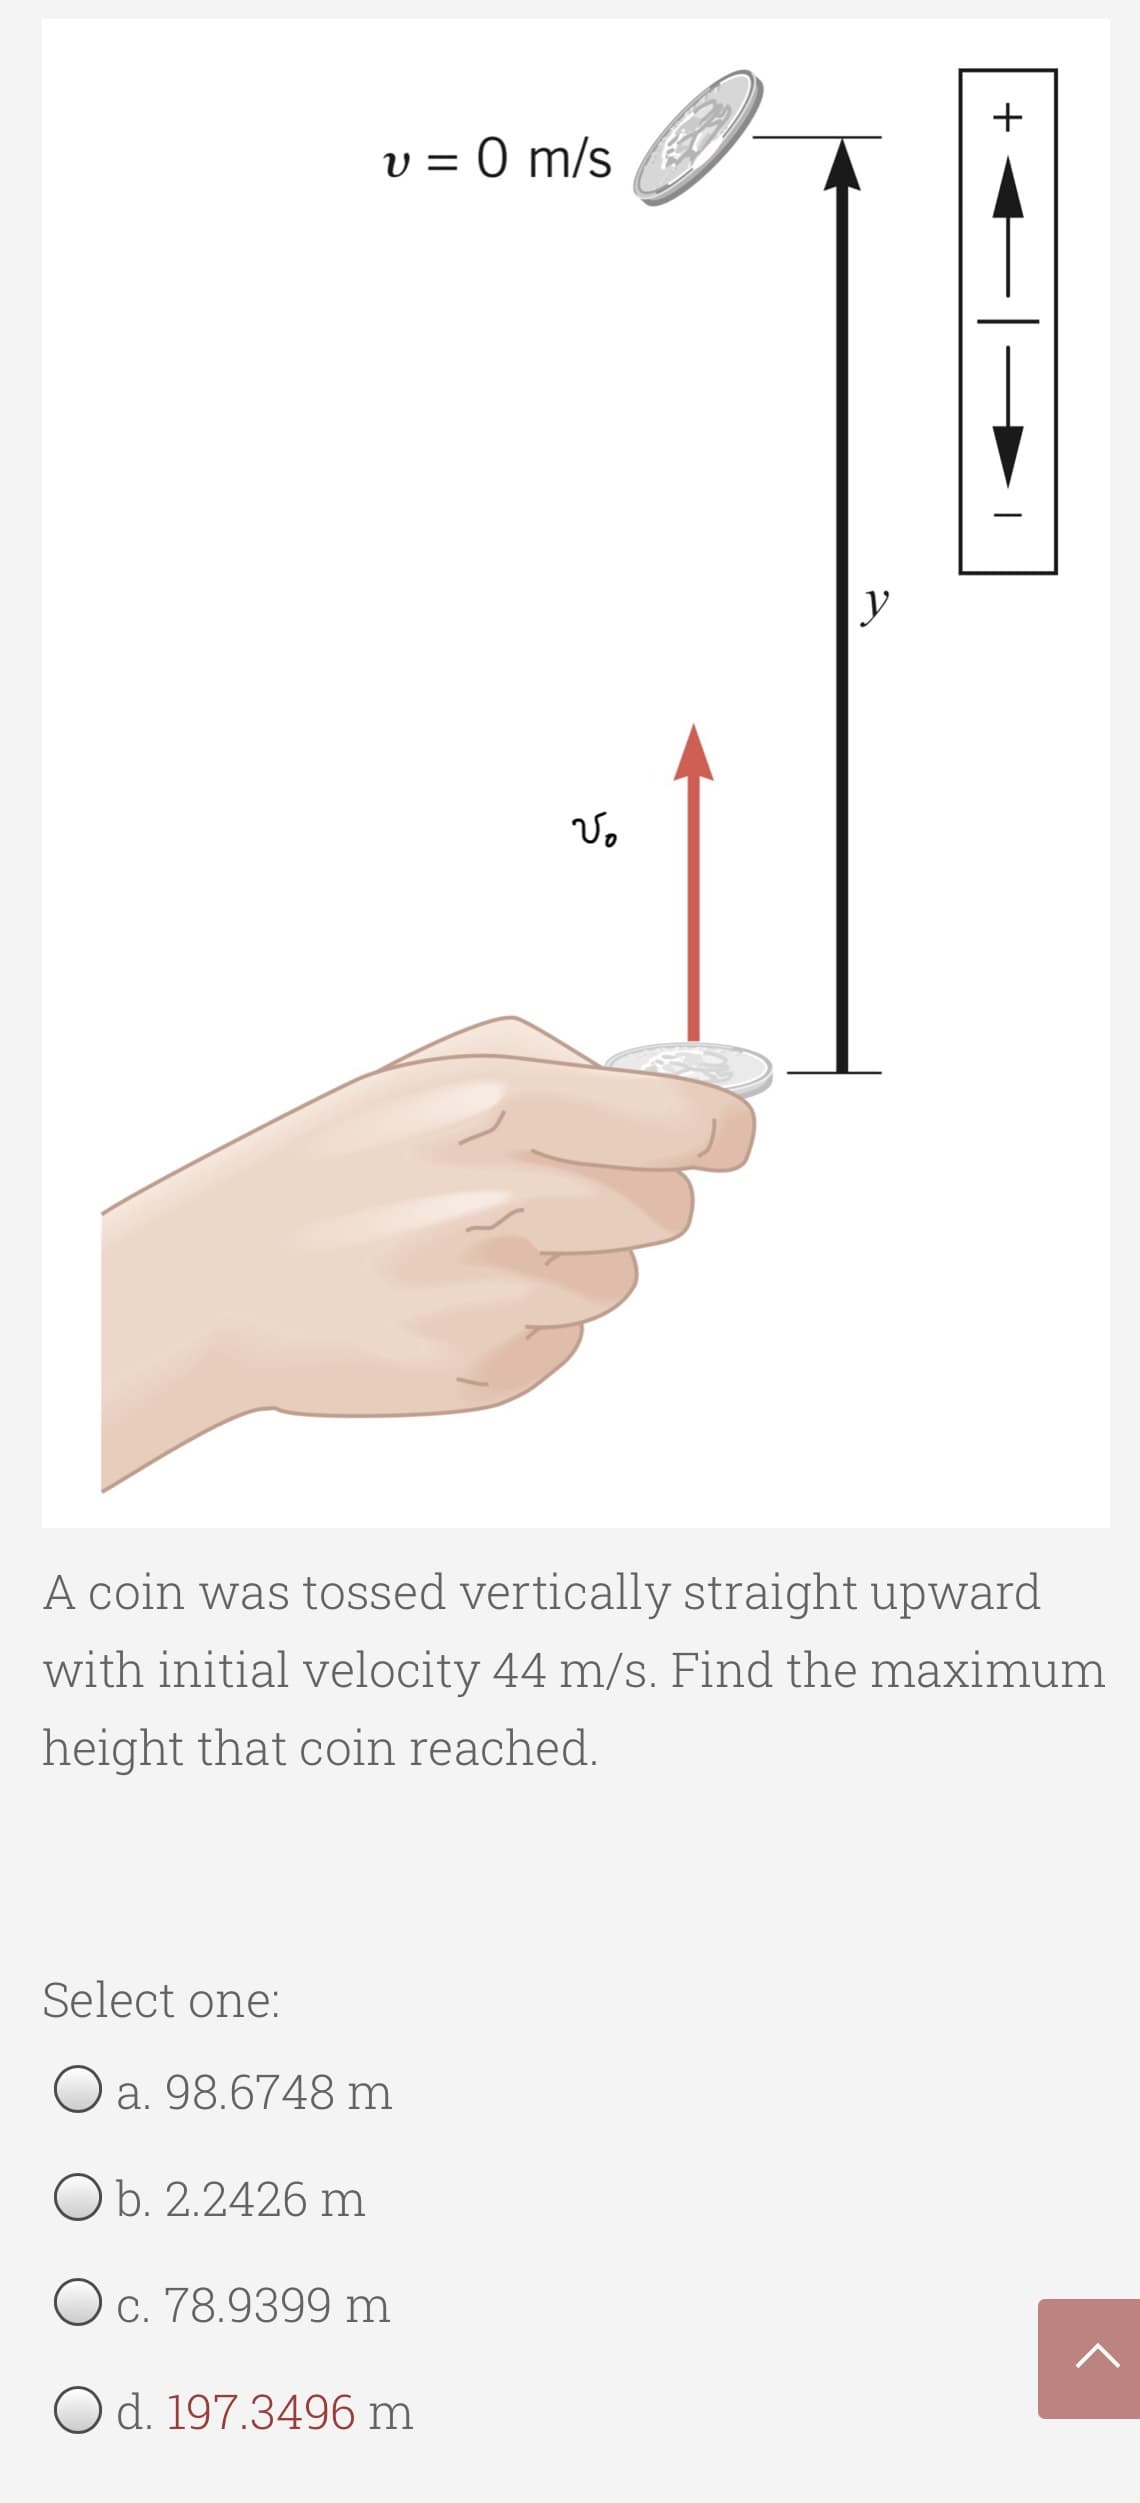 +
V = 0 m/s
y
A coin was tossed vertically straight upward
with initial velocity 44 m/s. Find the maximum
height that coin reached.
Select one:
O a. 98.6748 m
O b. 2.2426 m
O c. 78.9399 m
O d. 197.3496 m
